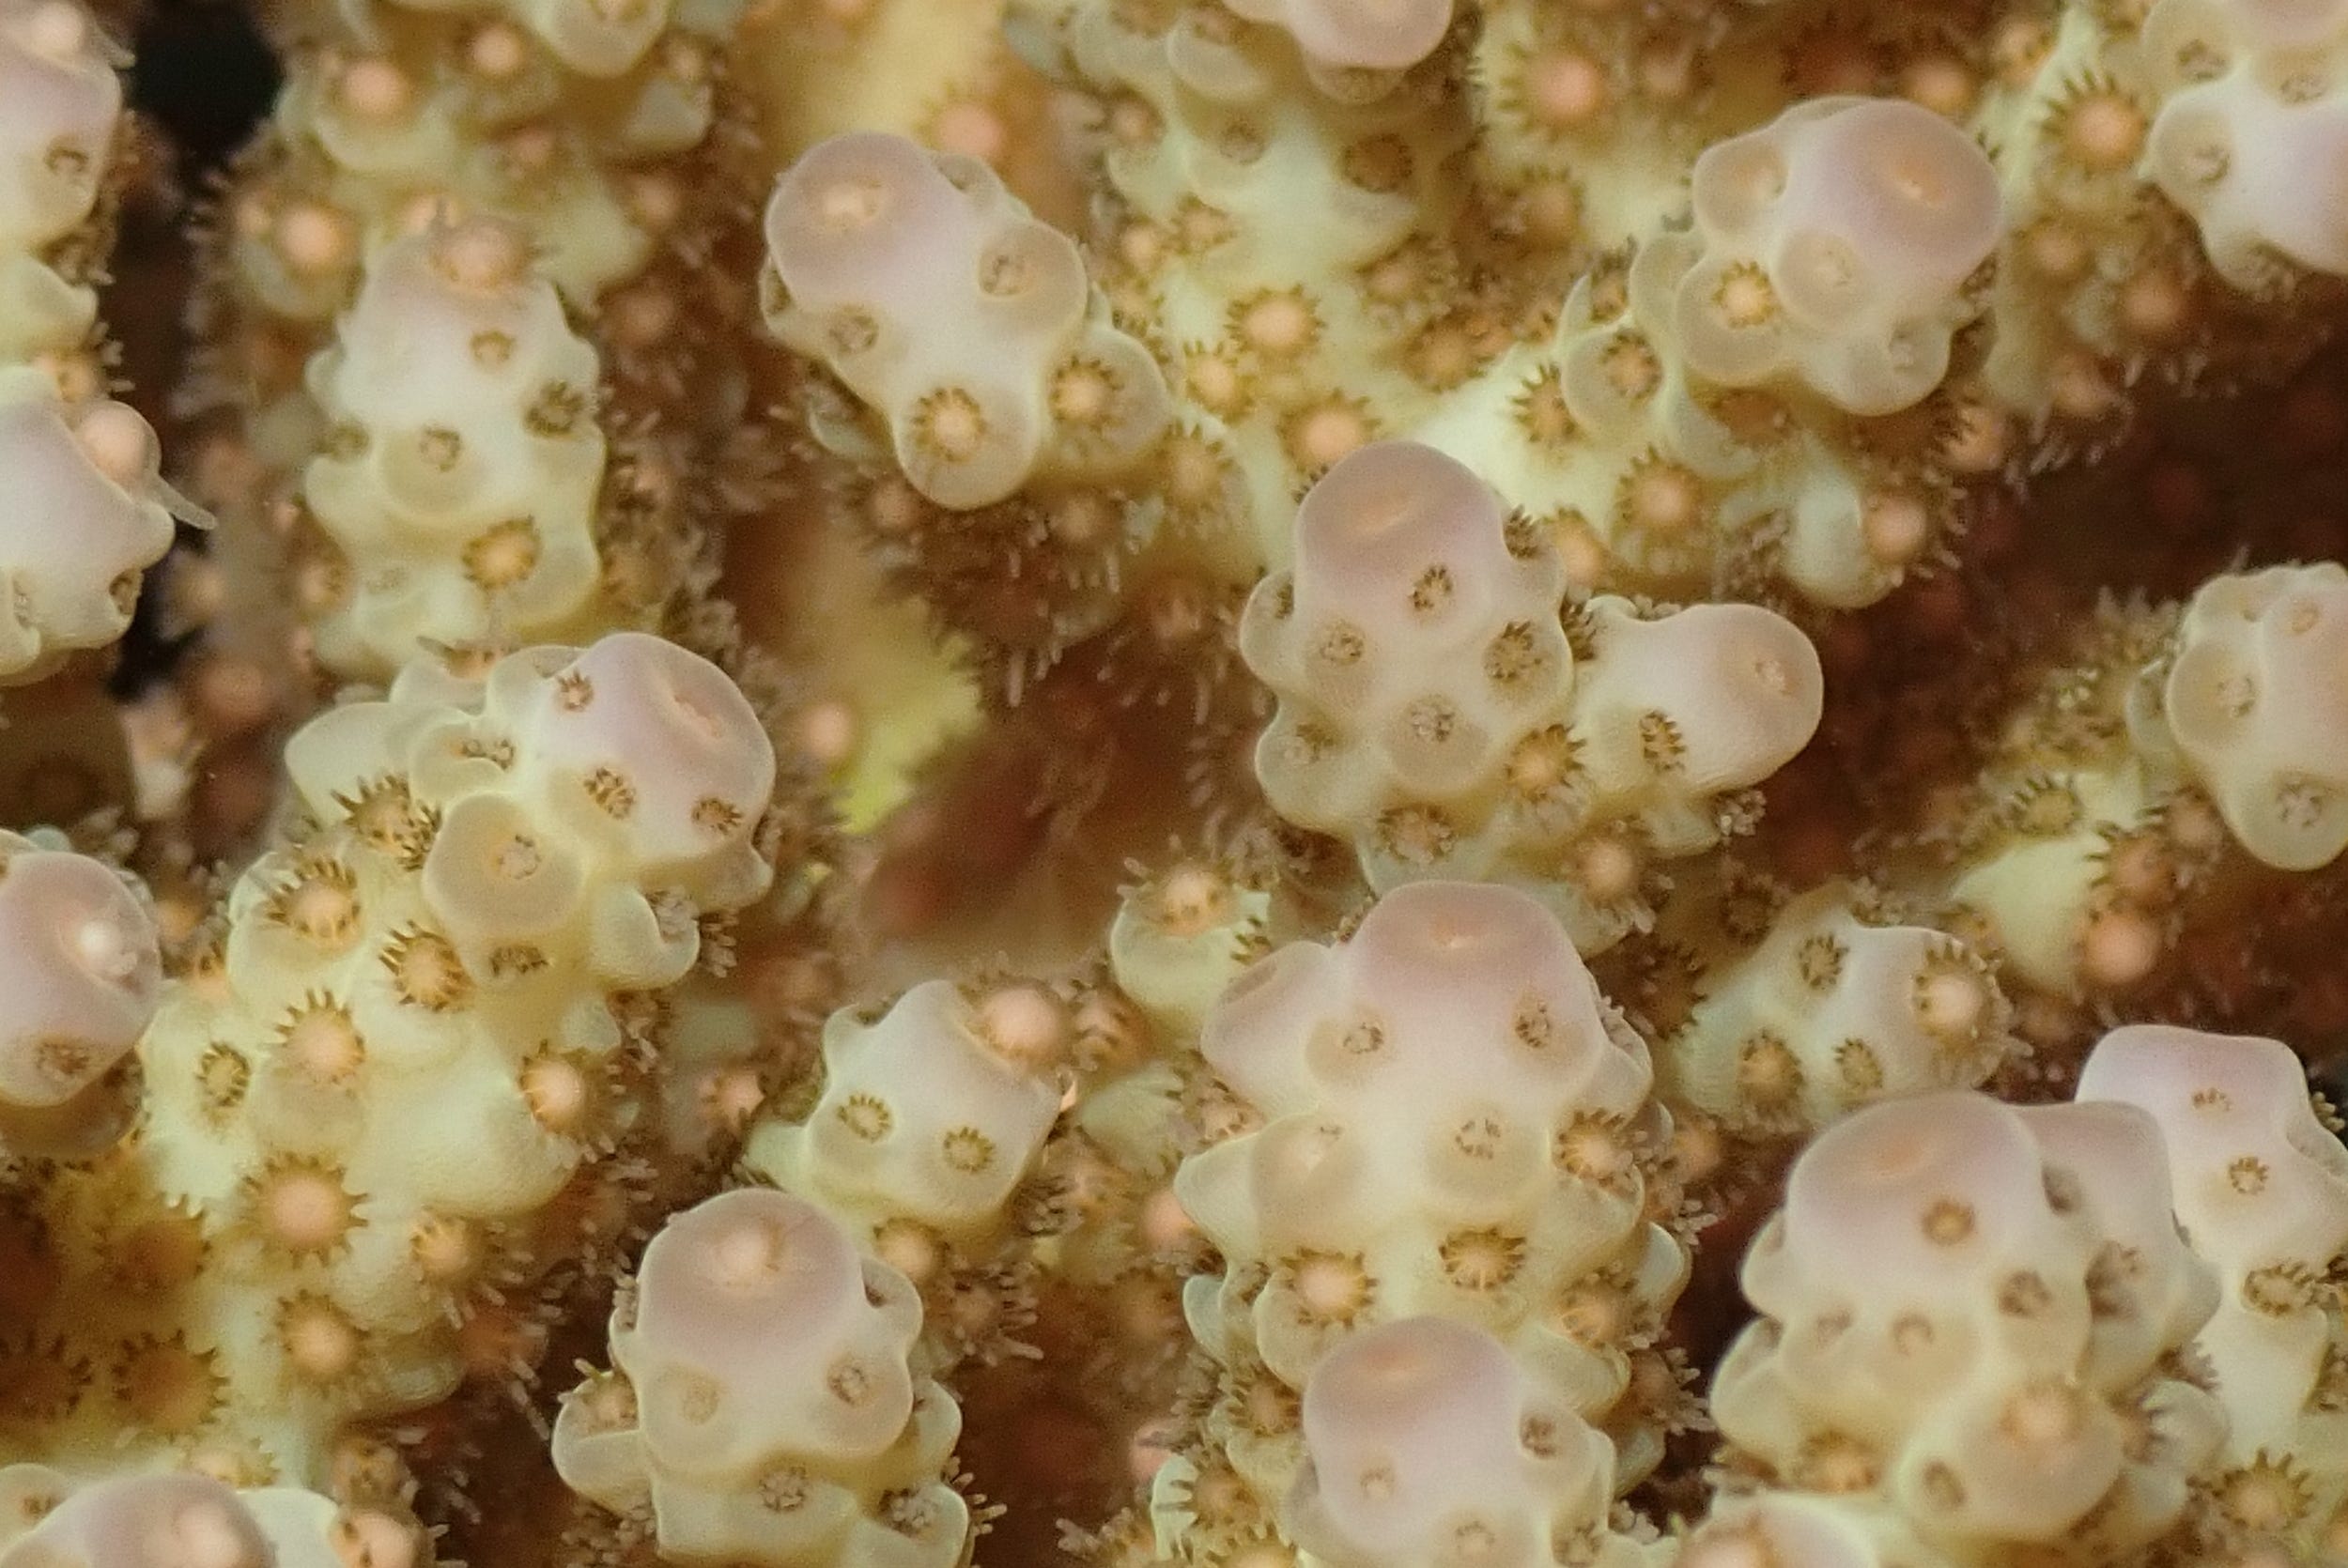 coral up close engorged protuberances ready to spawn